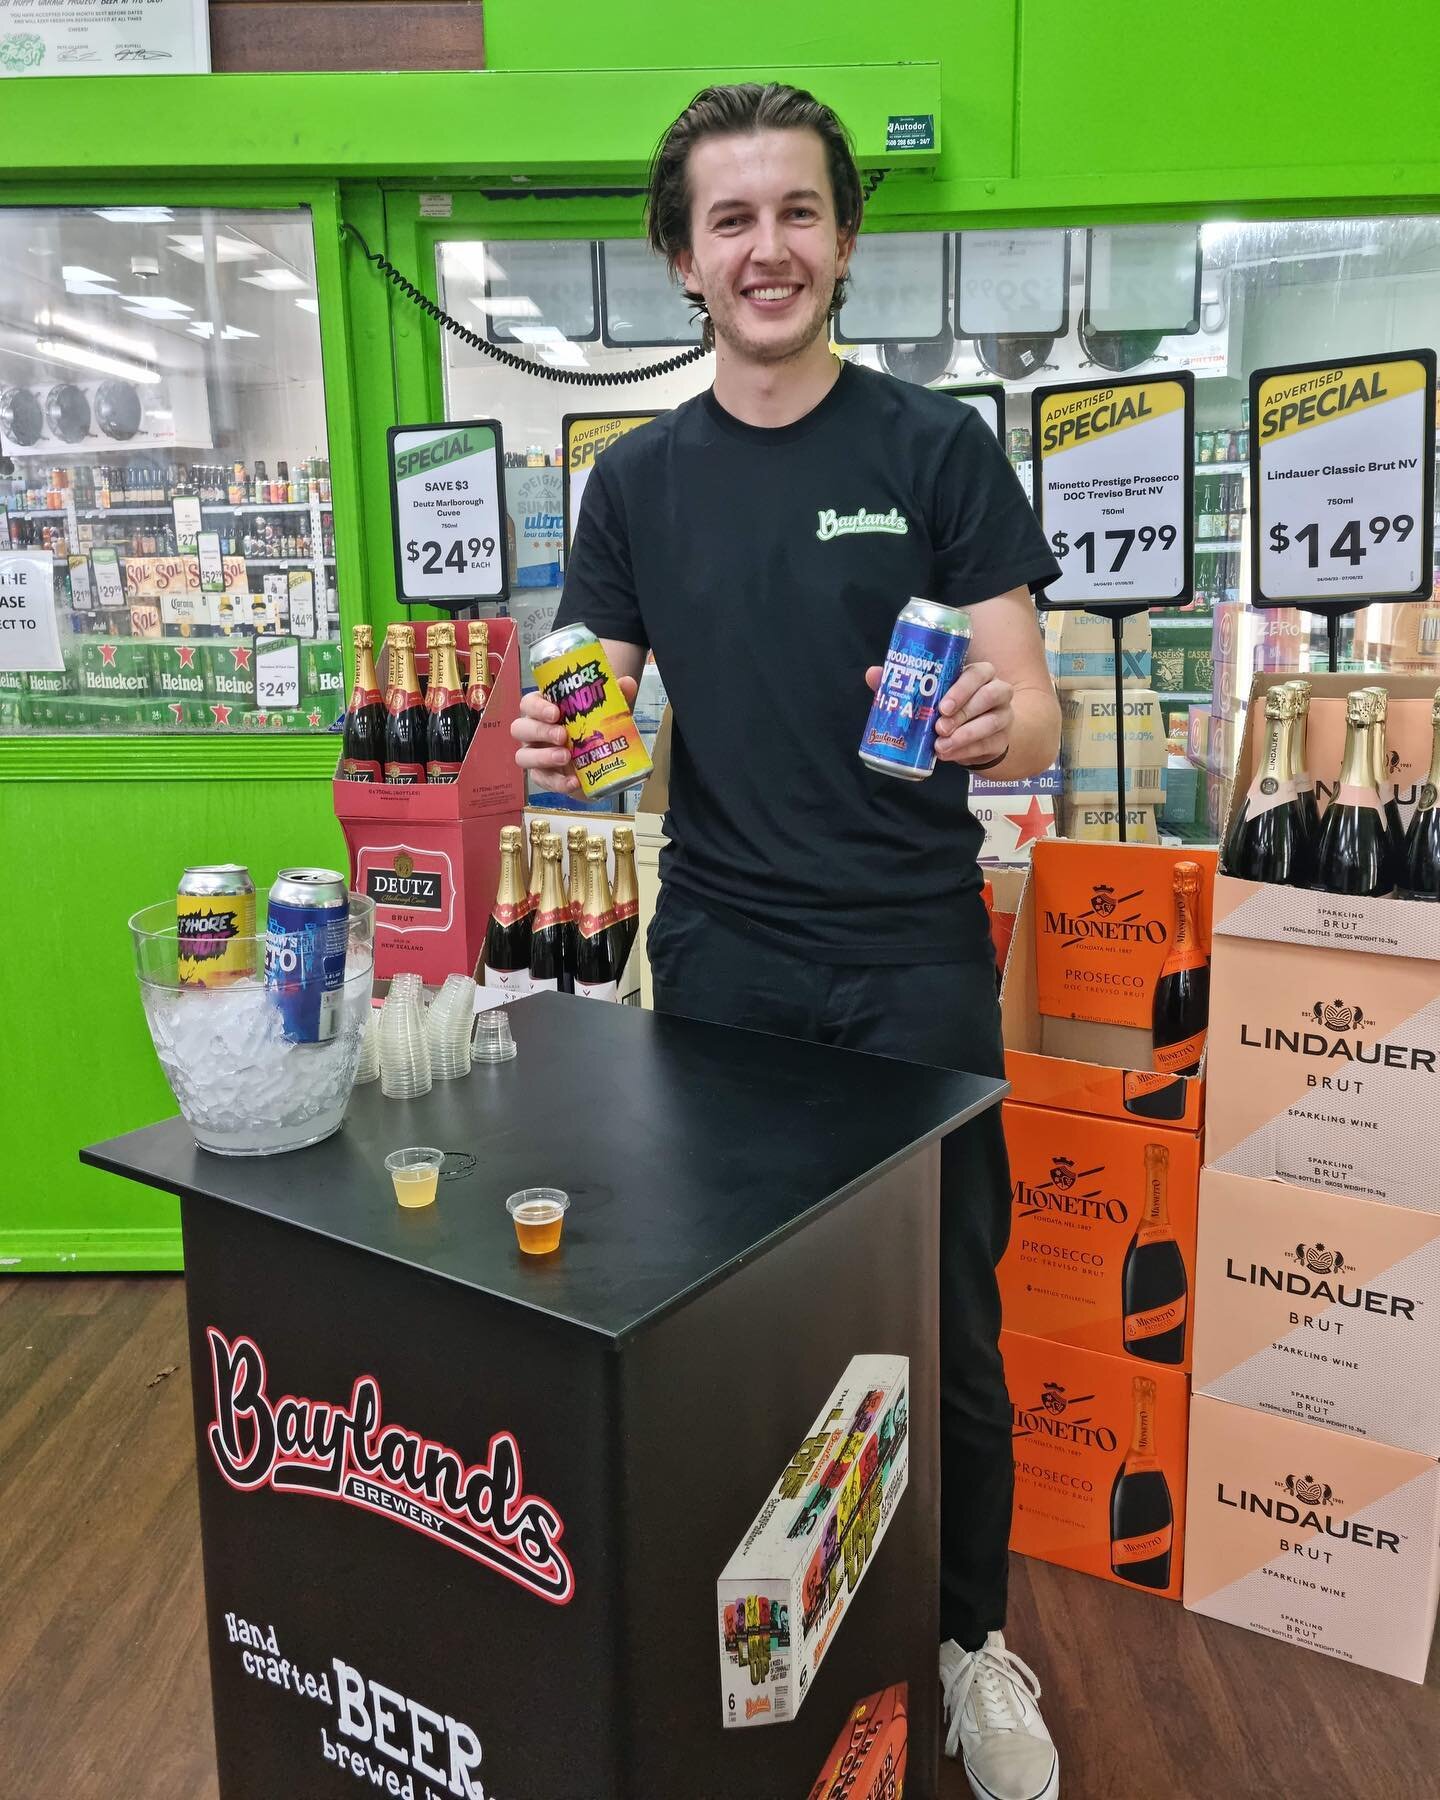 NEW STOCKIST ALERT 💥 
@baylandsbrewery handcrafted beer now available at @liquorlandnewmarket 🍻 keep your eyes peeled for more stockists to come 👀 

#handcraftedbeer #brandambasssdors #experientialmarketingagency #sampling #liquorland #baylandsbee